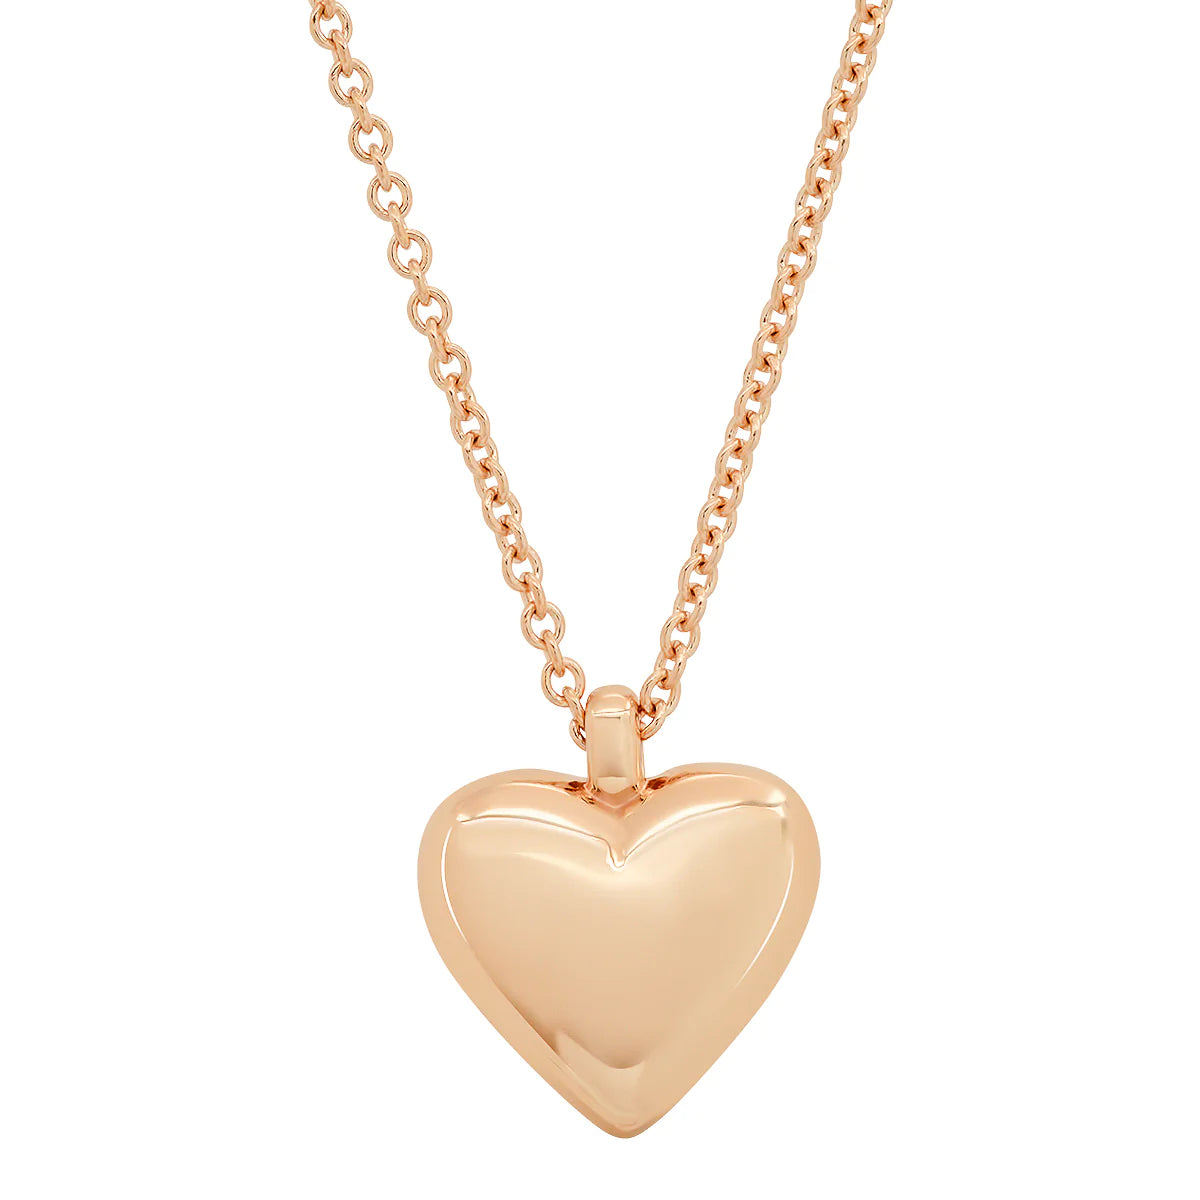 Buy By Adina Eden Puffy Heart Necklace online